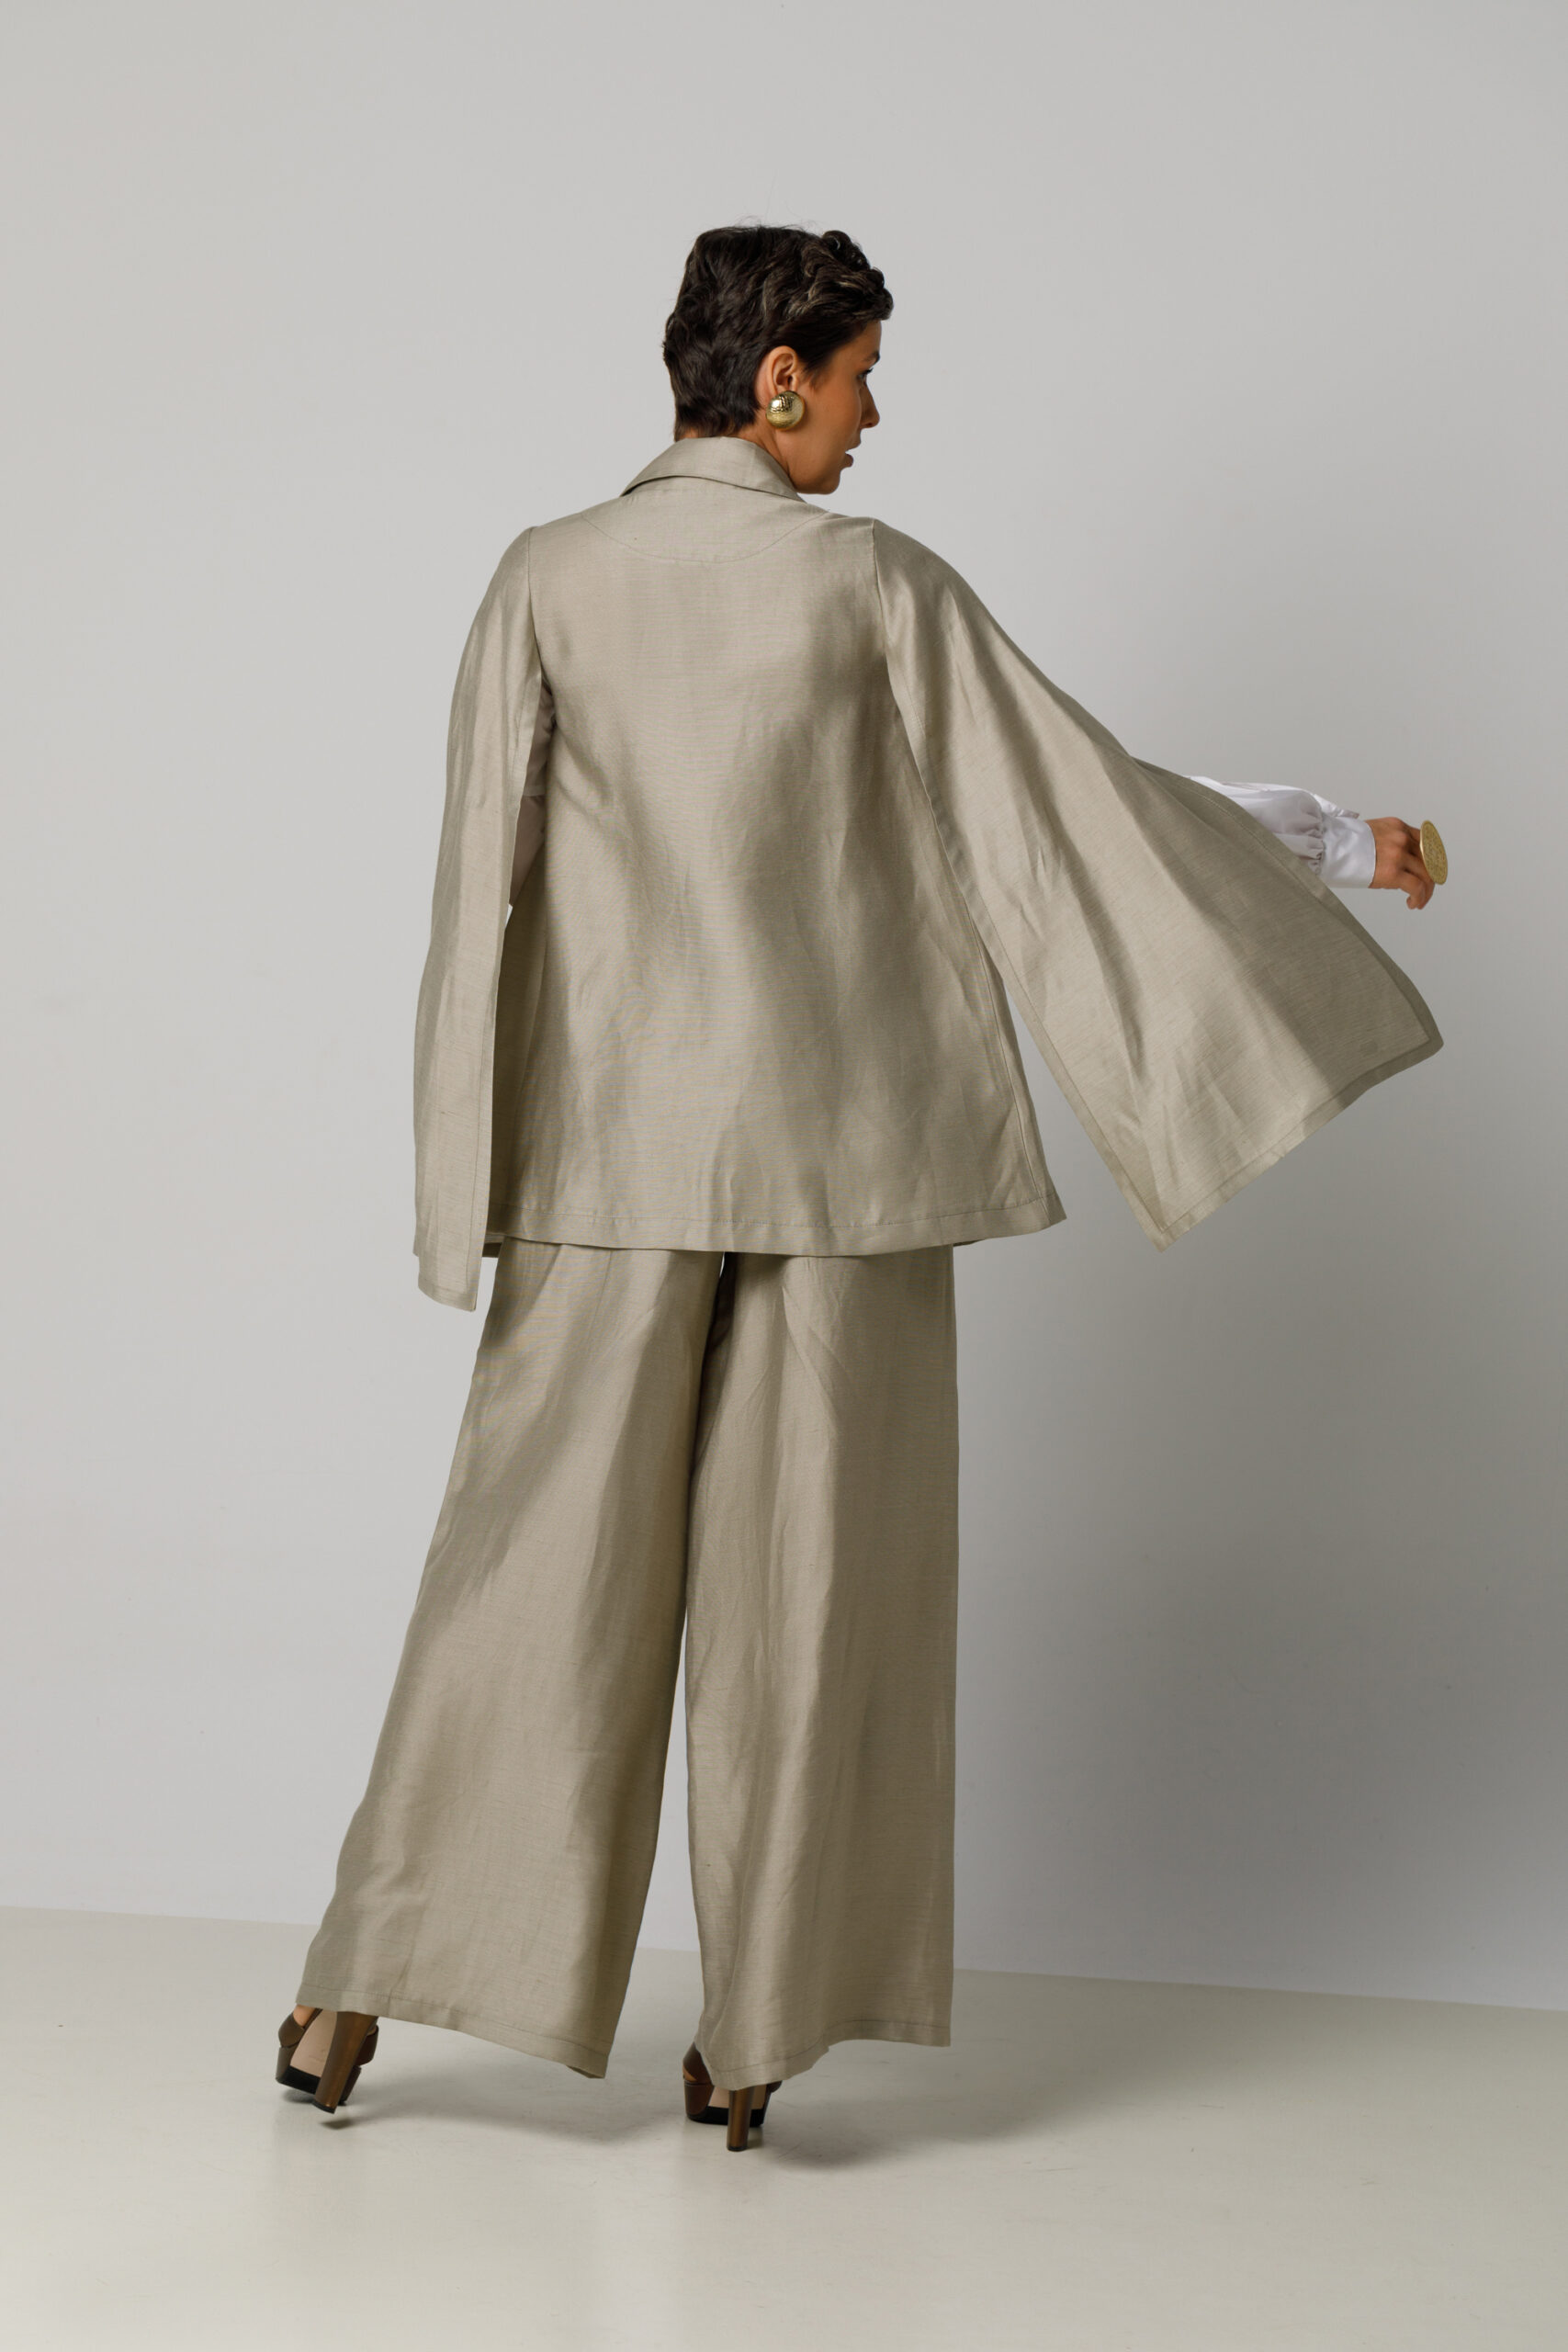 ABBY statement linen jacket with bow detail. Natural fabrics, original design, handmade embroidery